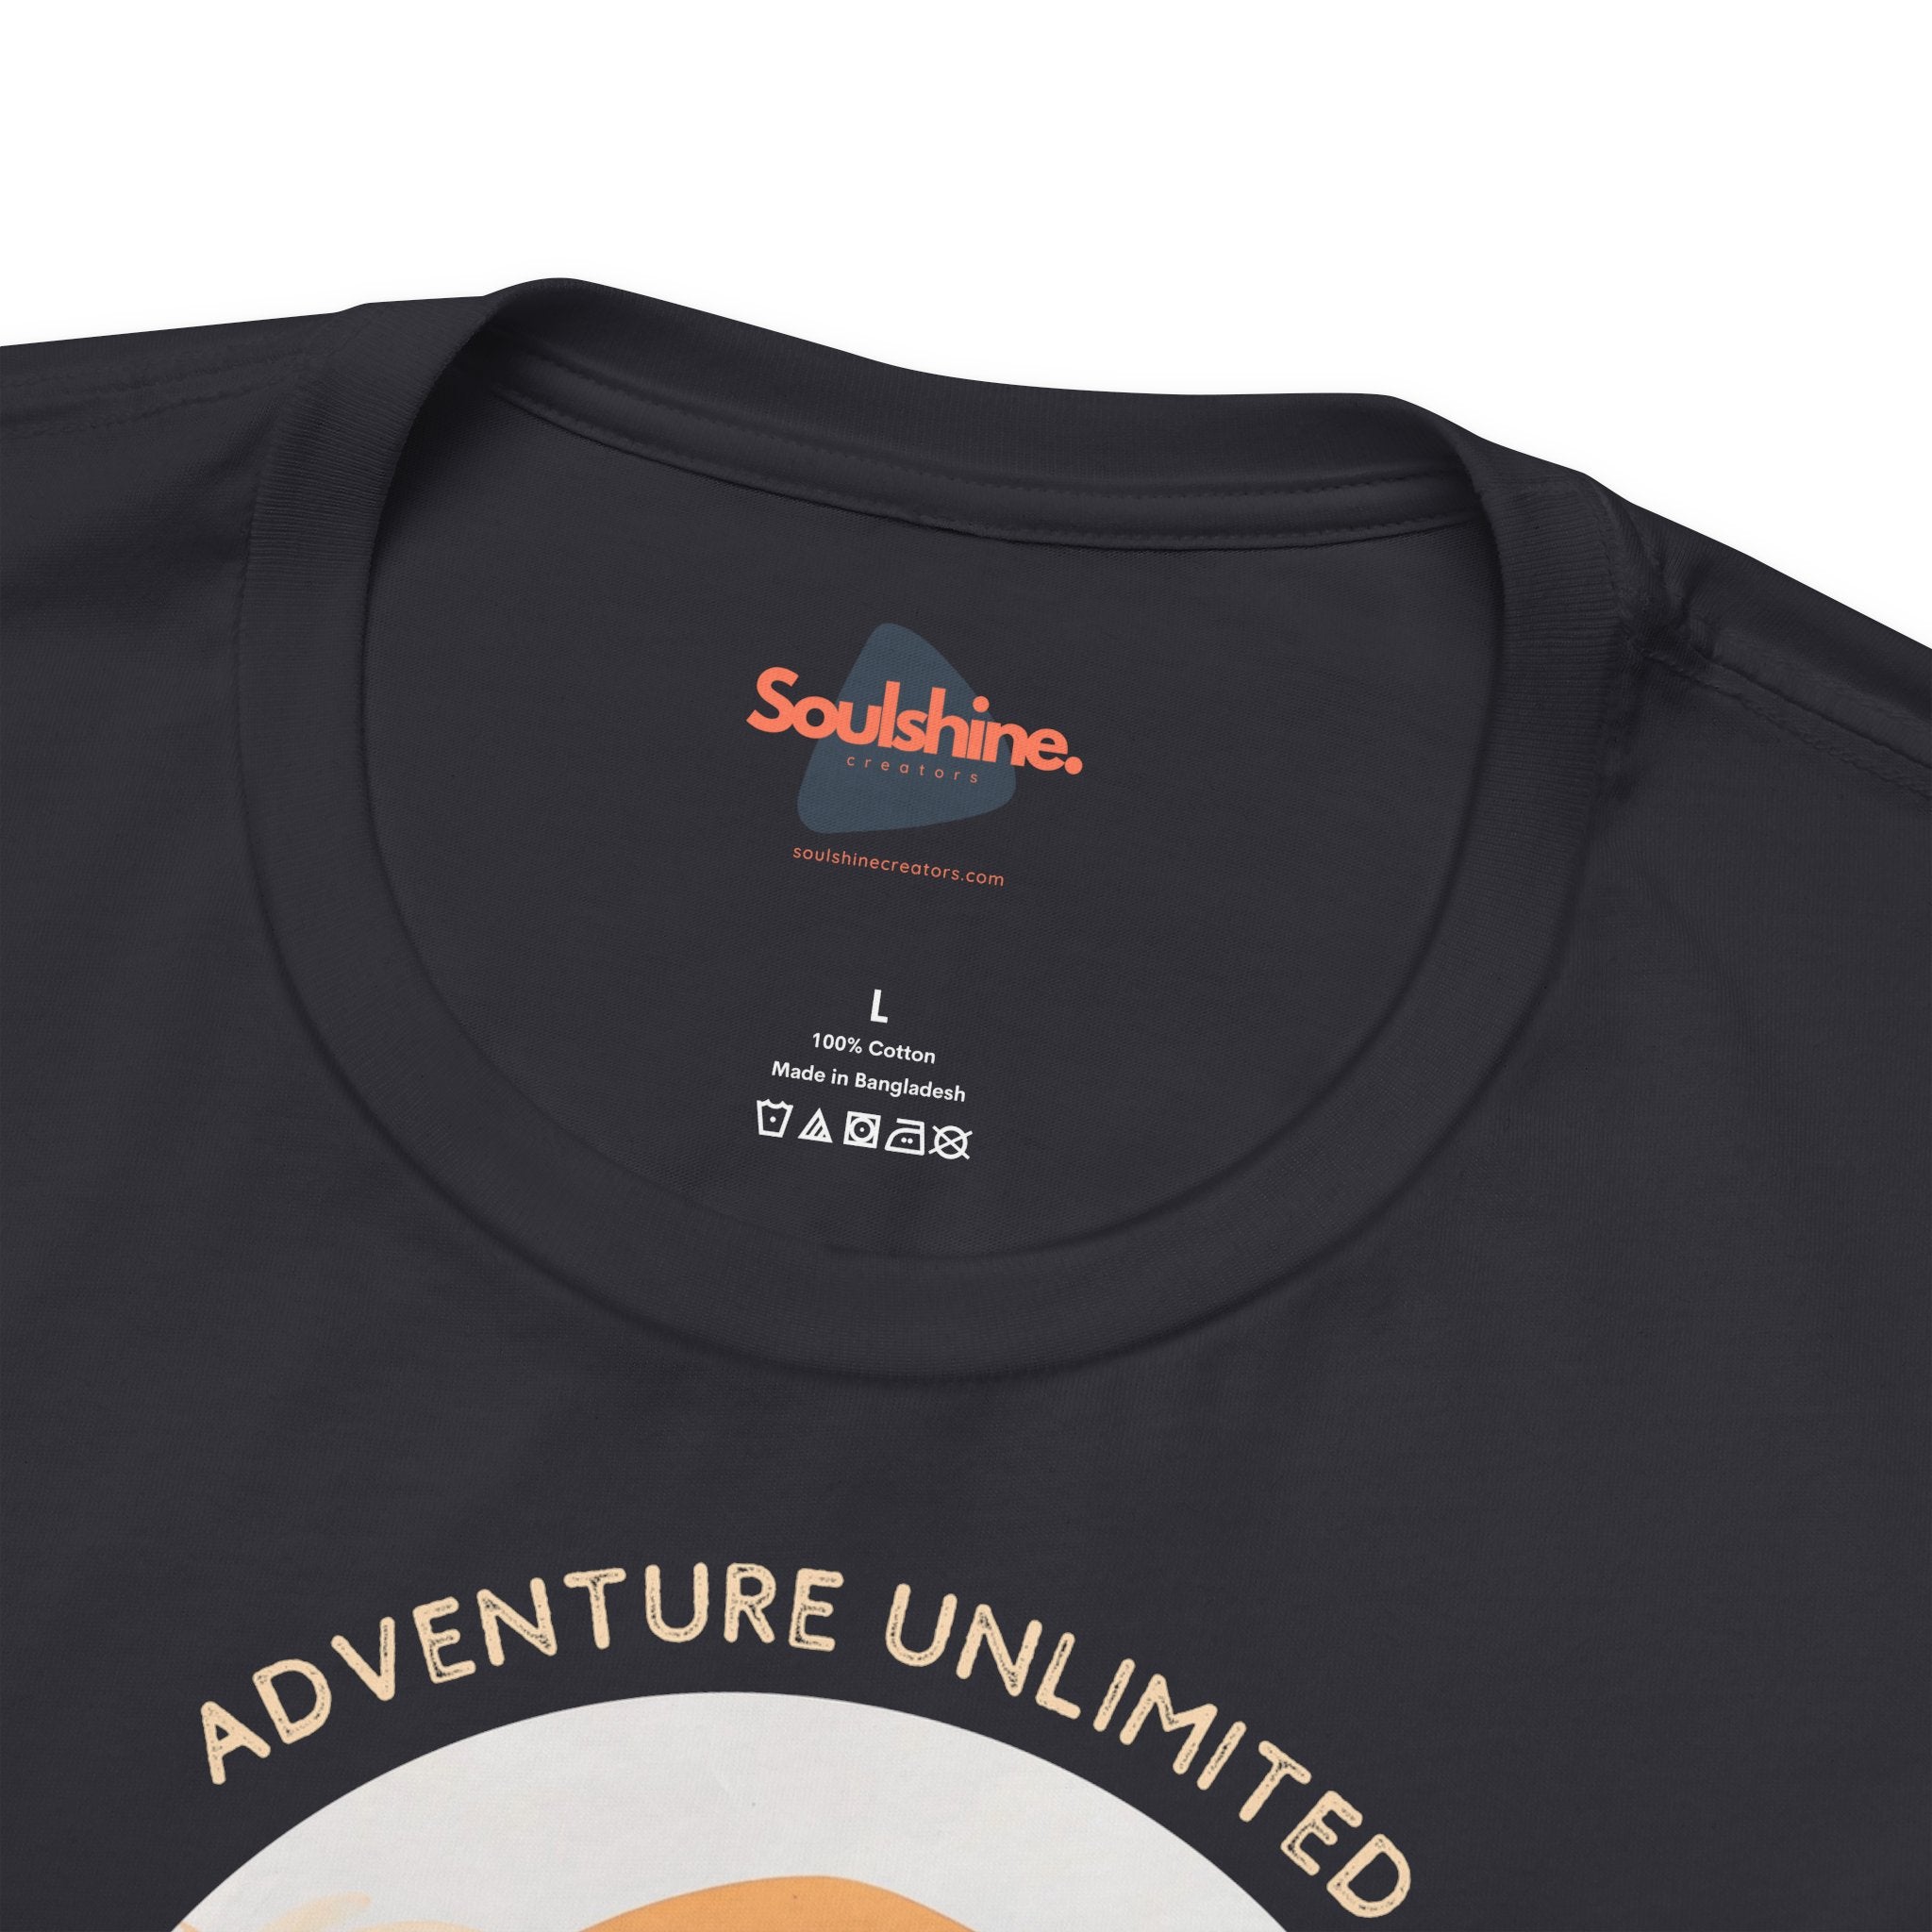 Adventure Unlimited Surfing T-Shirt from Soulshinecreators - Bella & Canvas - EU, direct-to-garment printed item